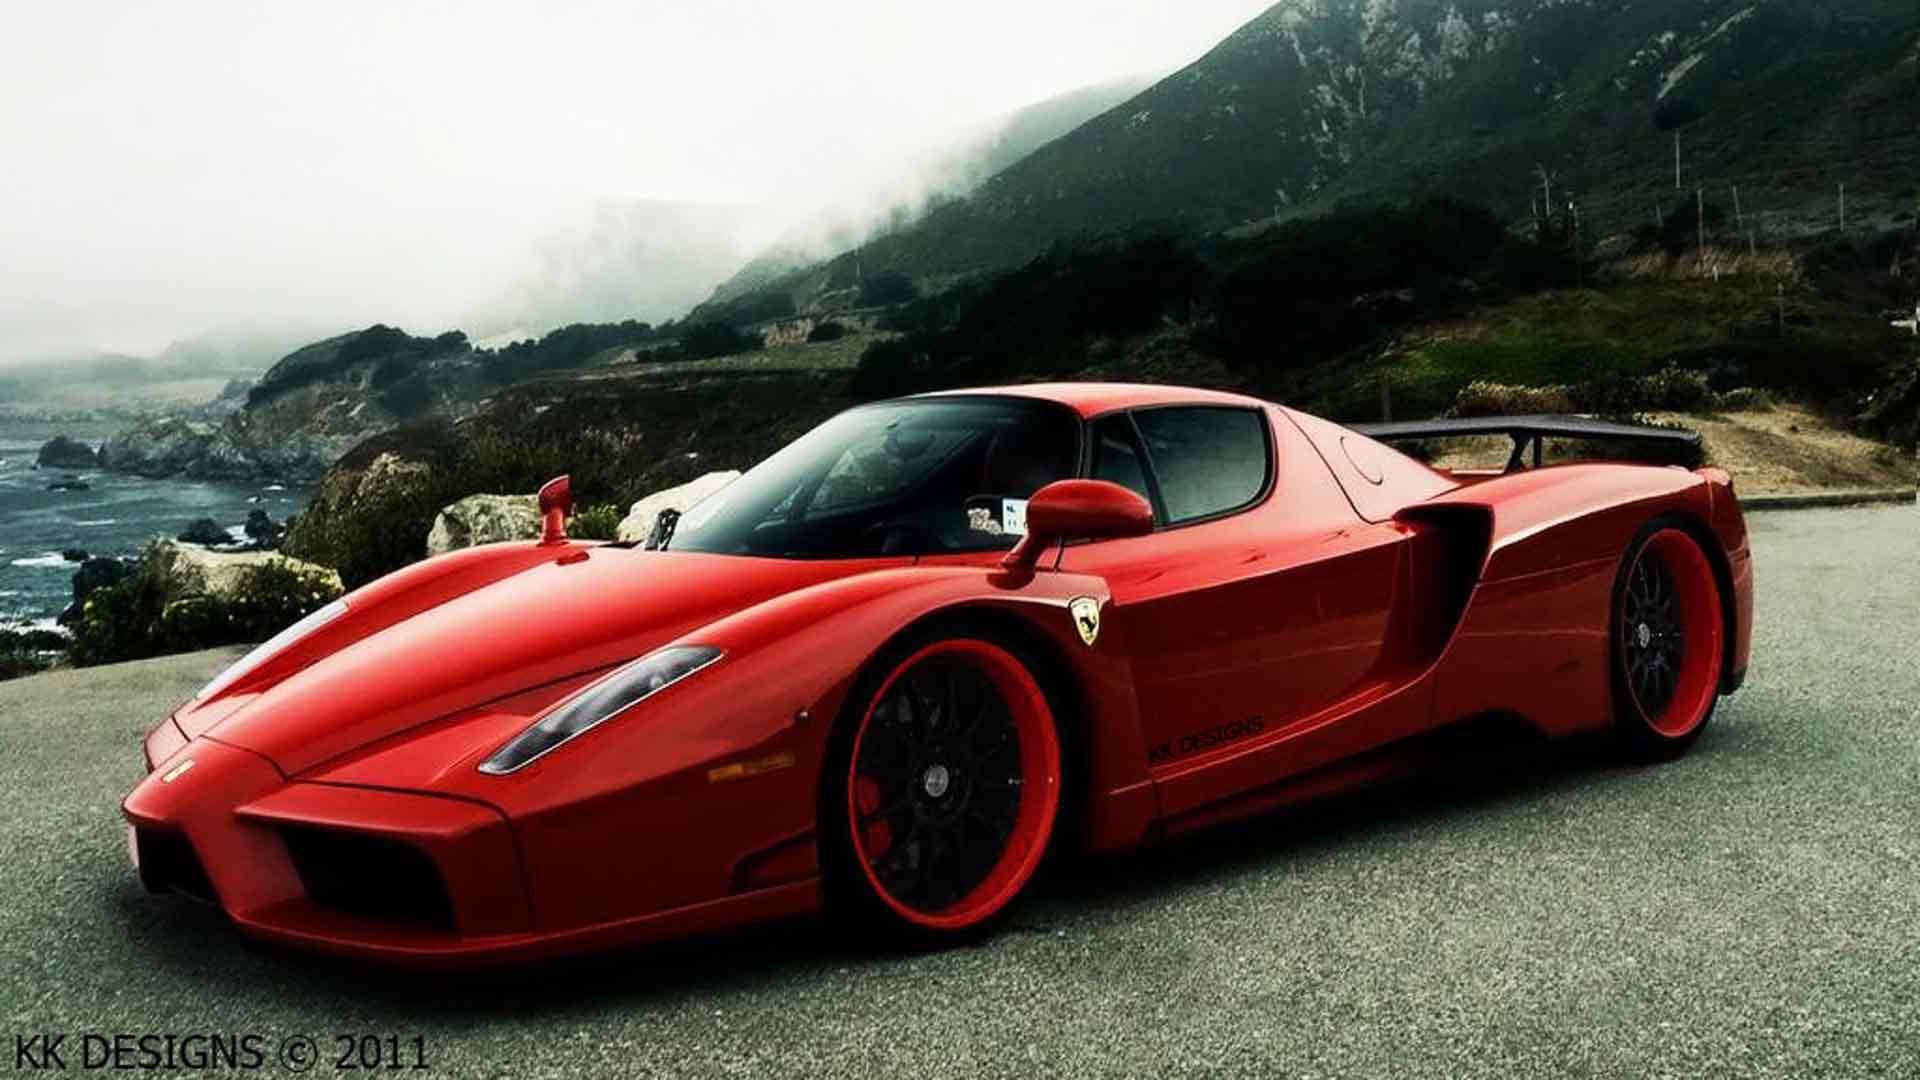 Best Collection Of Ferrari Exotic Car Wallpapers   SA Wallpapers 1920x1080